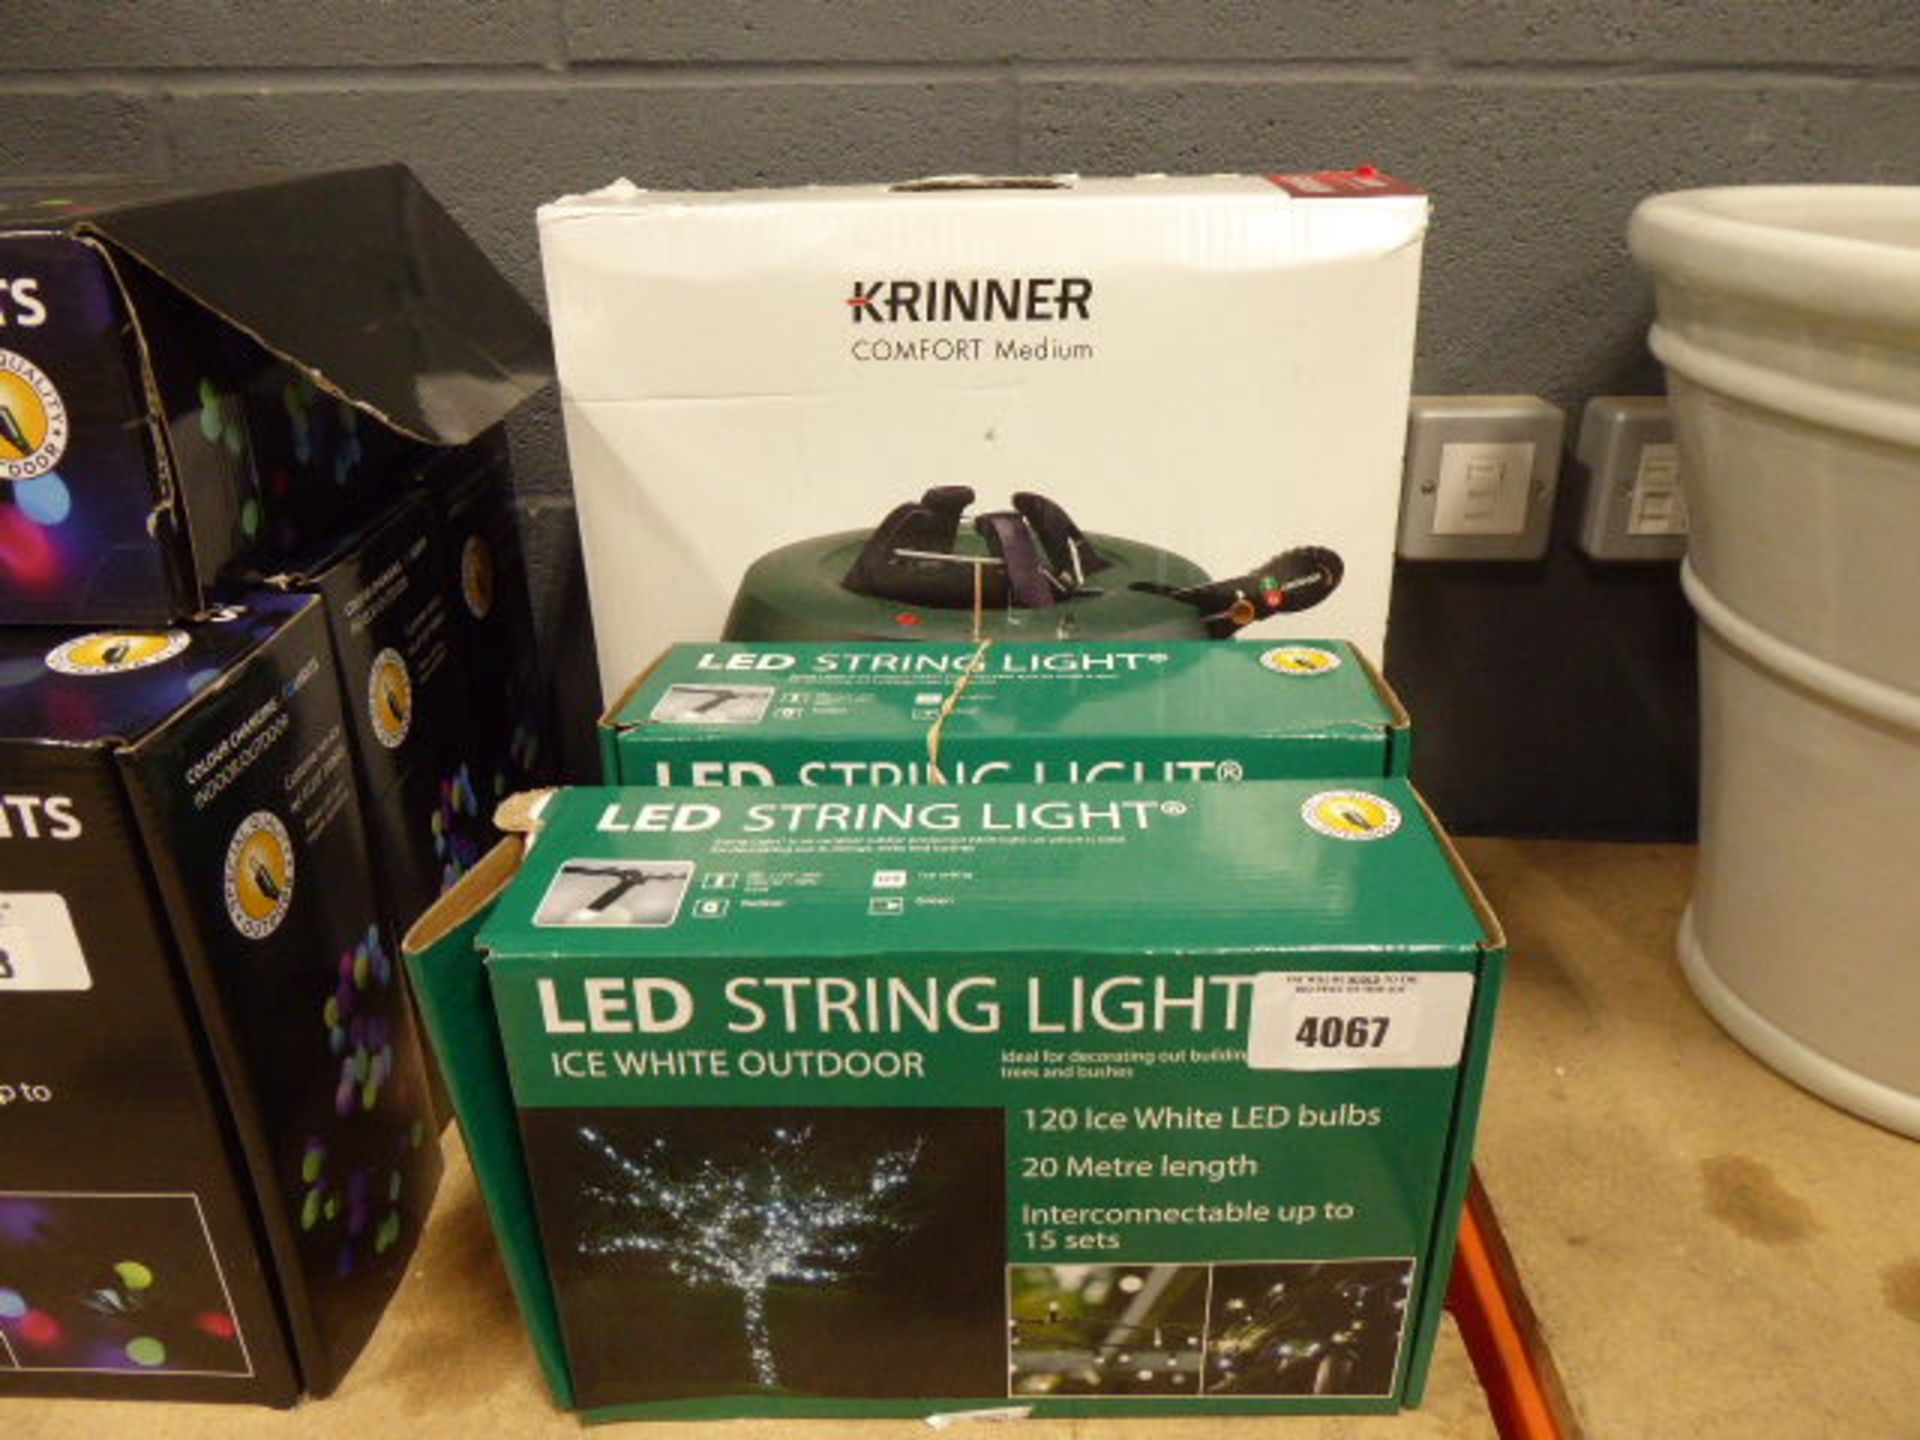 2 small green boxes of lED string lights and Christmas tree stand